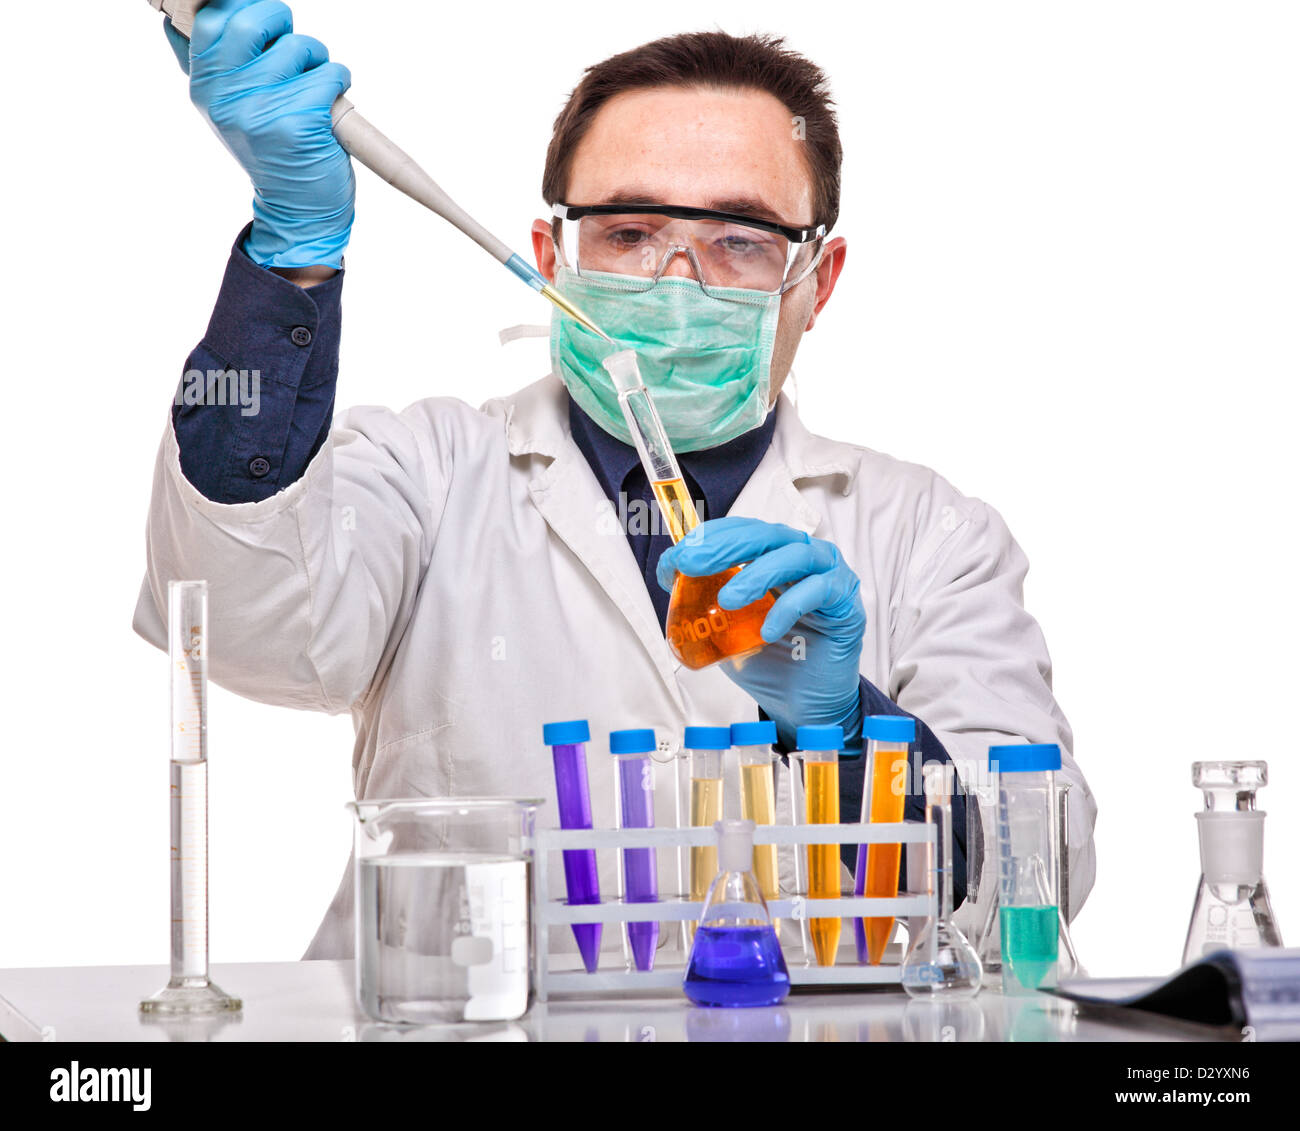 caucasian young scientist at work on white background Stock Photo